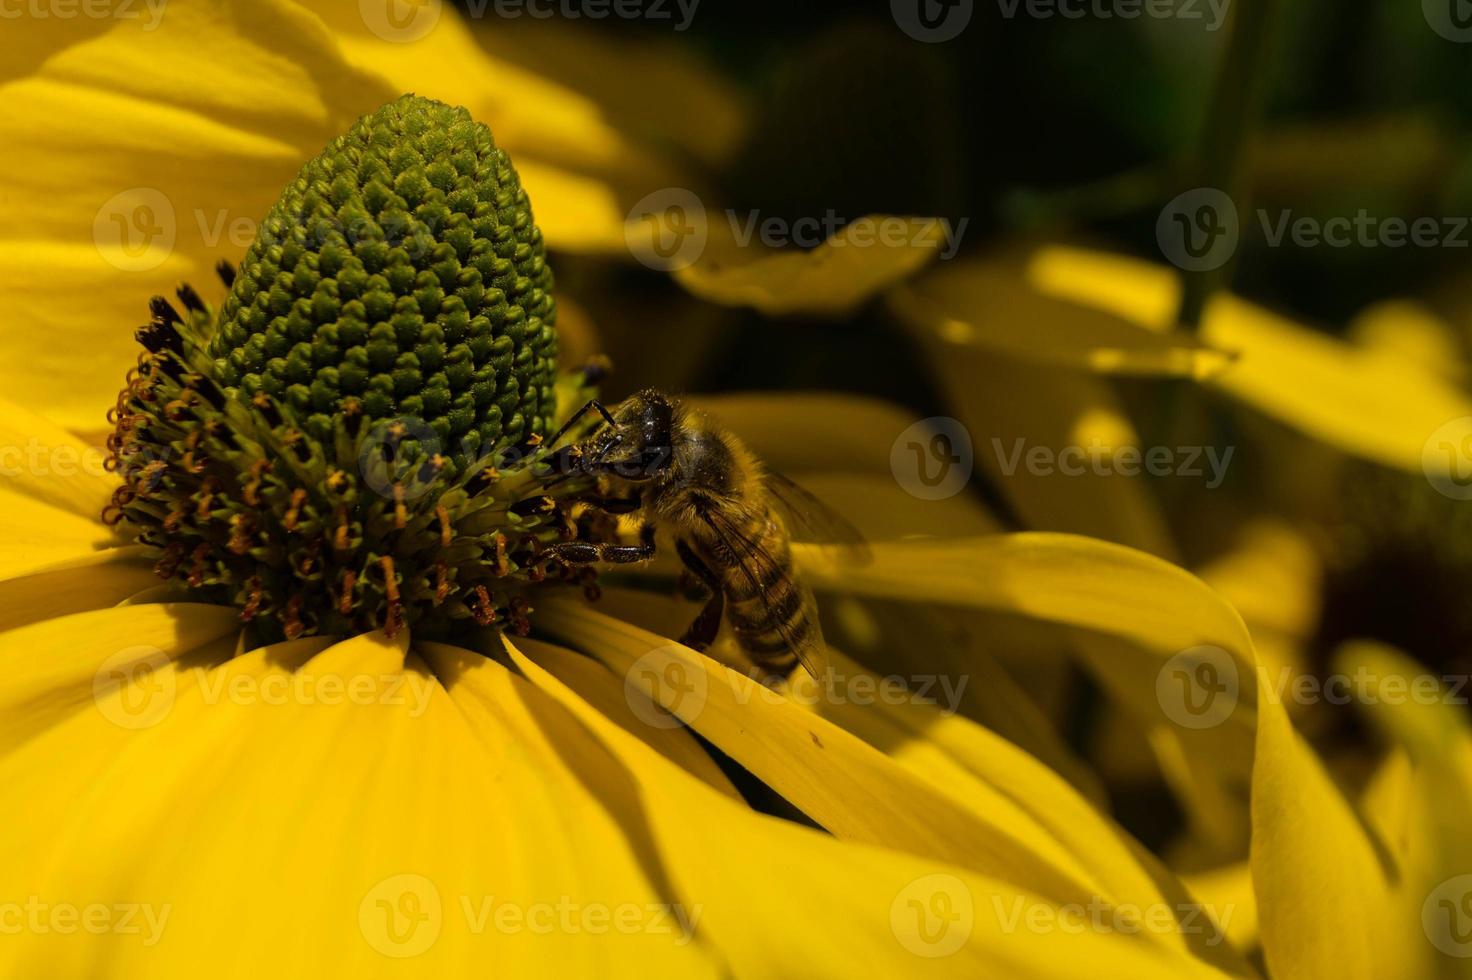 The insects collect pollen in the garden photo